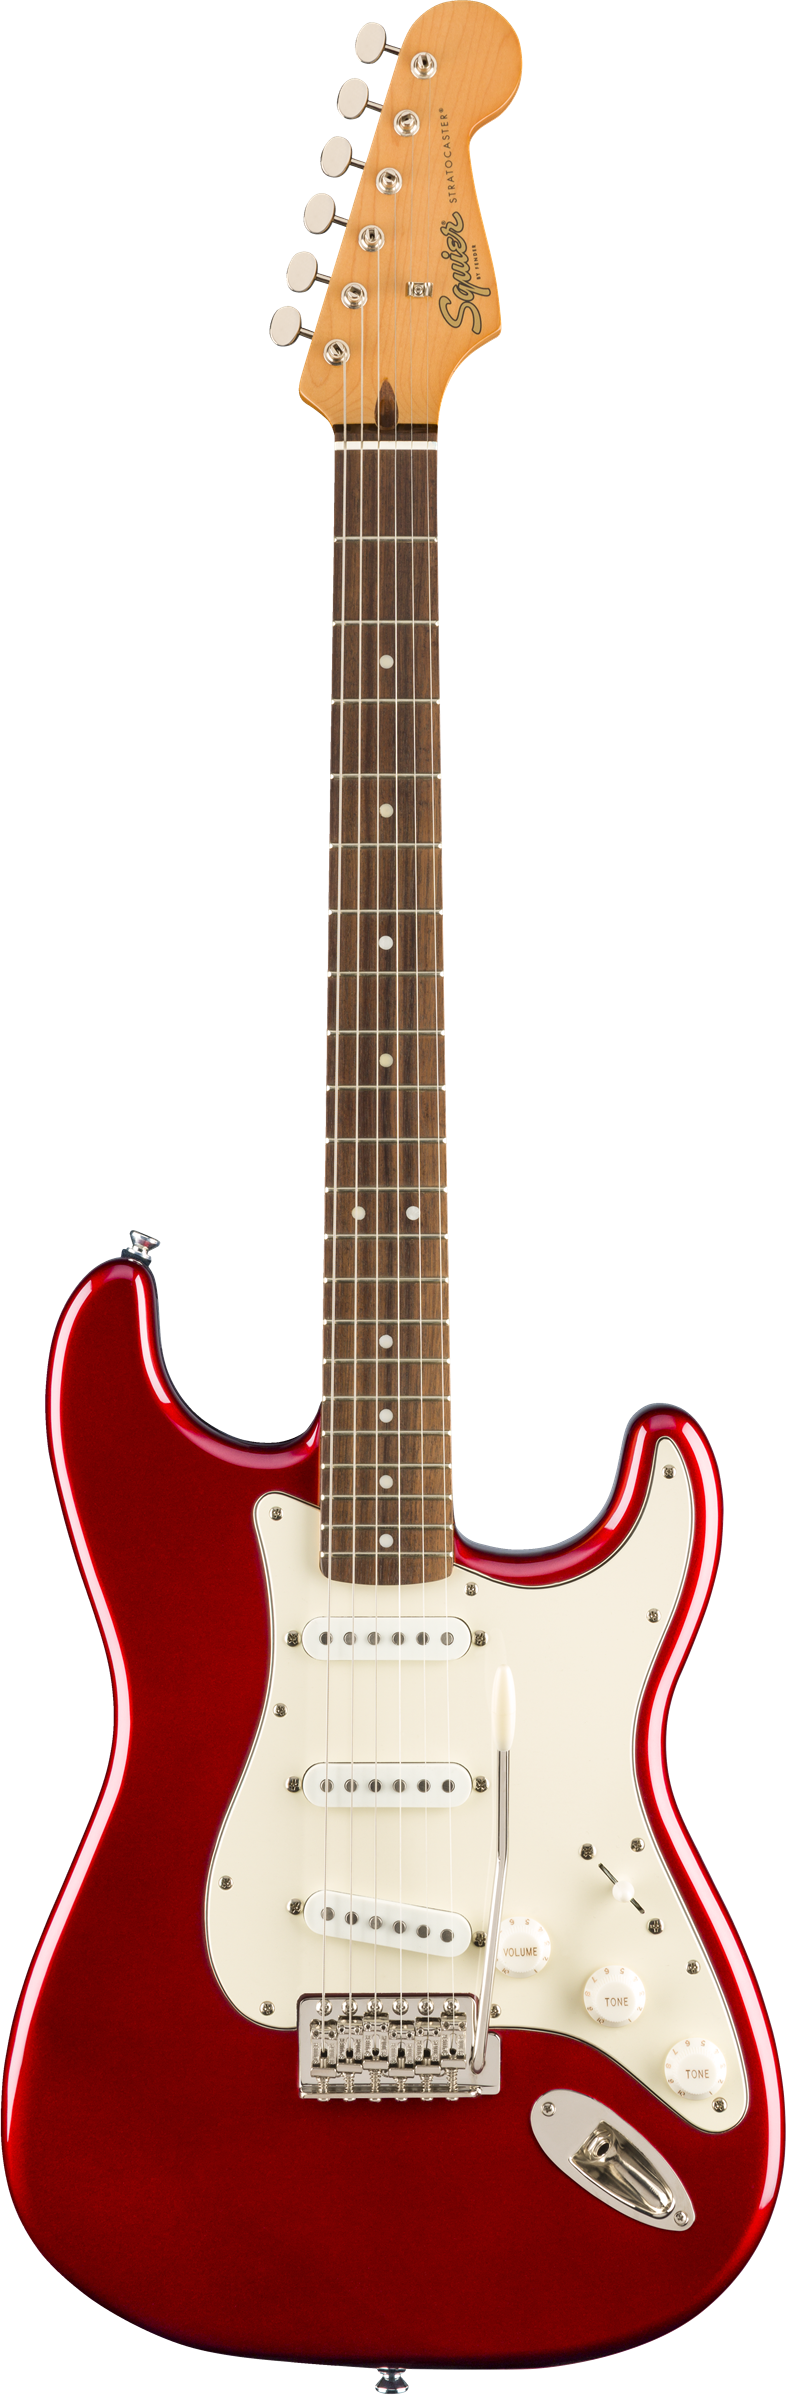 Stratocaster Classic Vibe 60s car Candy Apple Red